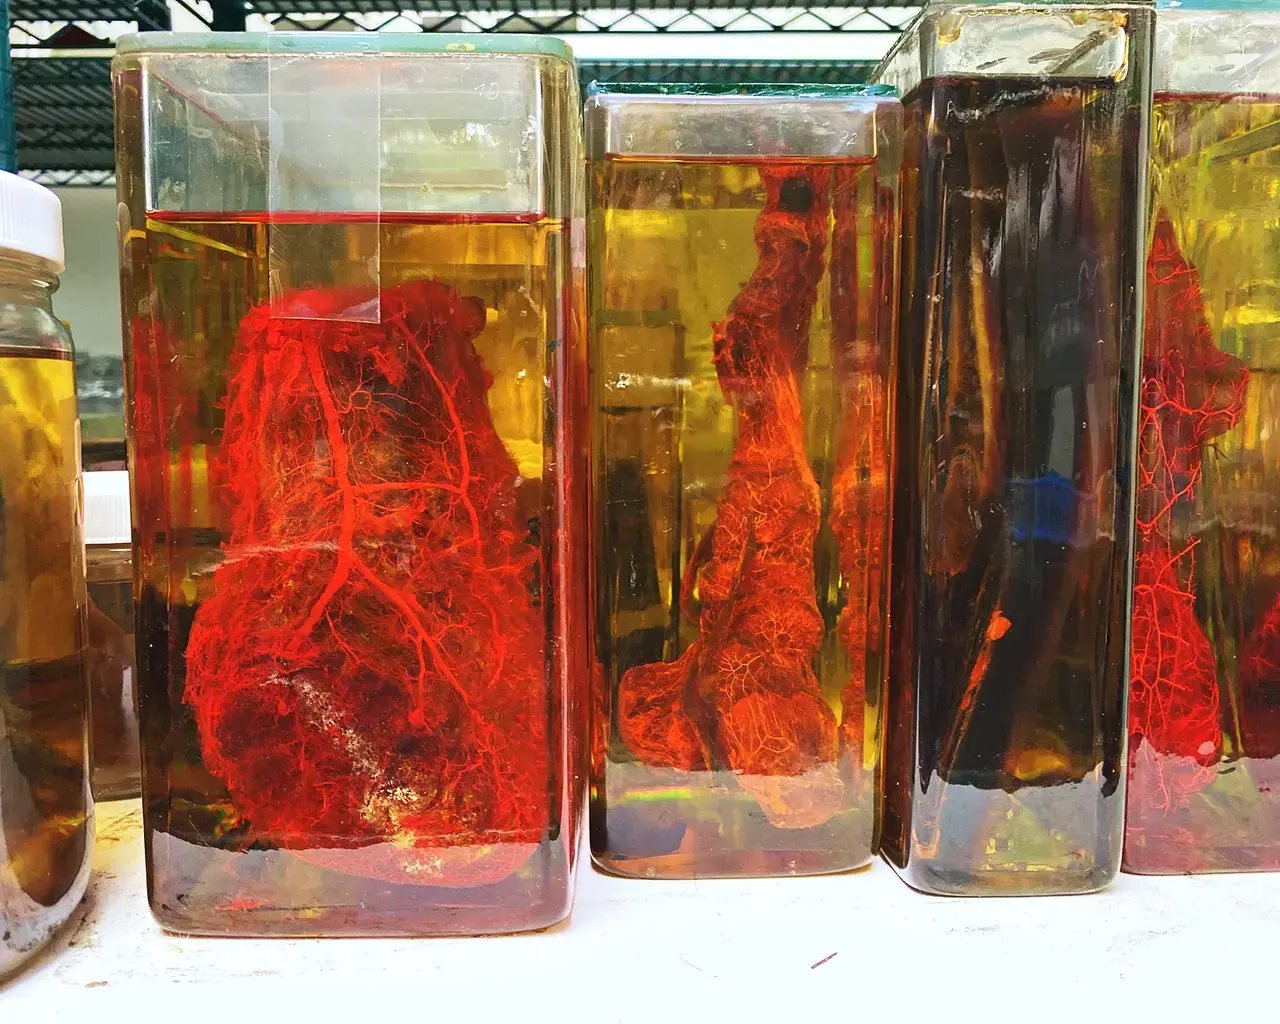 Collection of vascularized wet specimens in climate-controlled storage at the Mütter Museum, Philadelphia PA. Photo courtesy of The College of Physicians of Philadelphia.